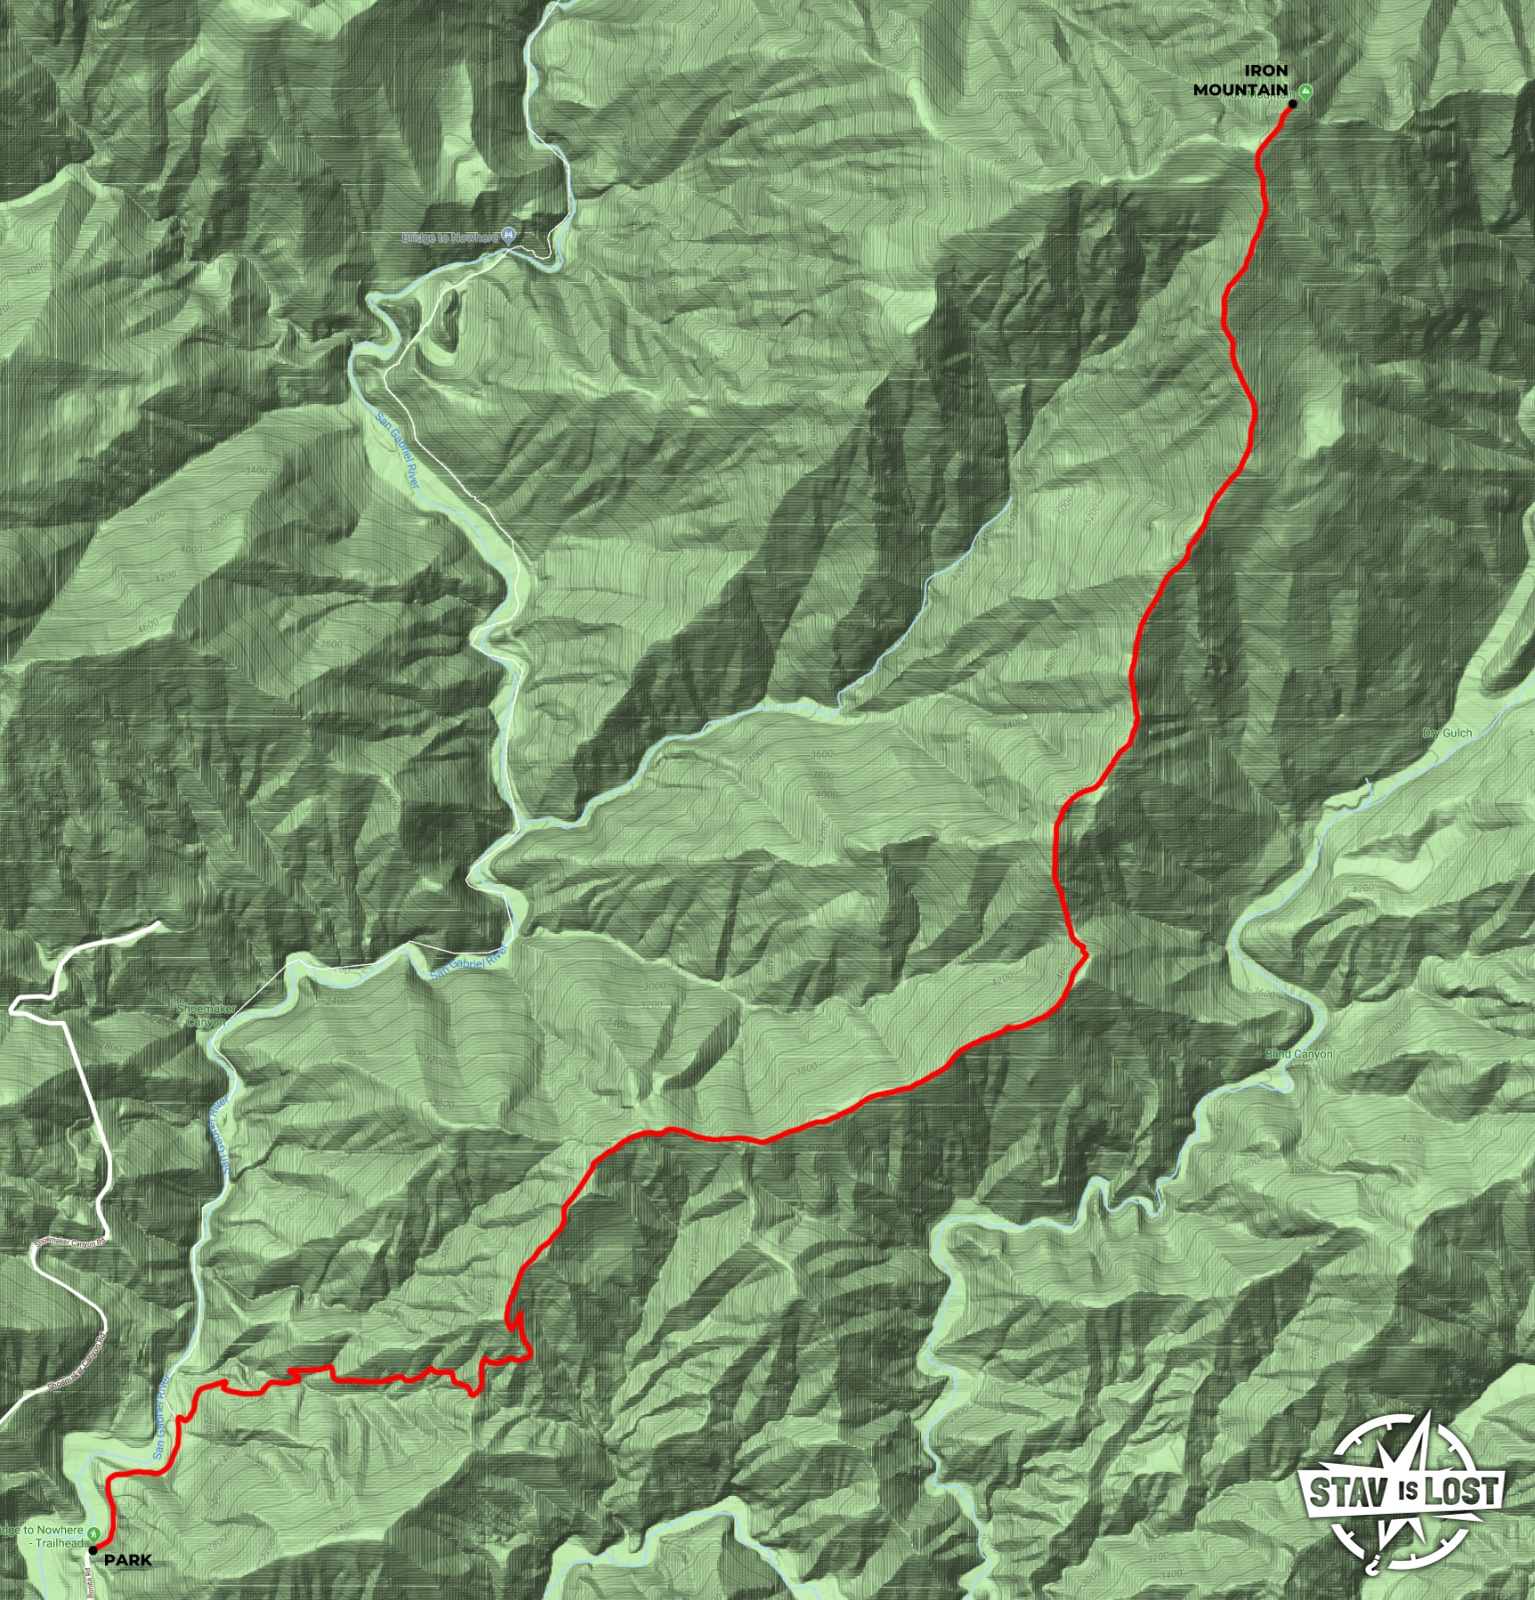 map for Iron Mountain via Heaton Flat Trail by stav is lost